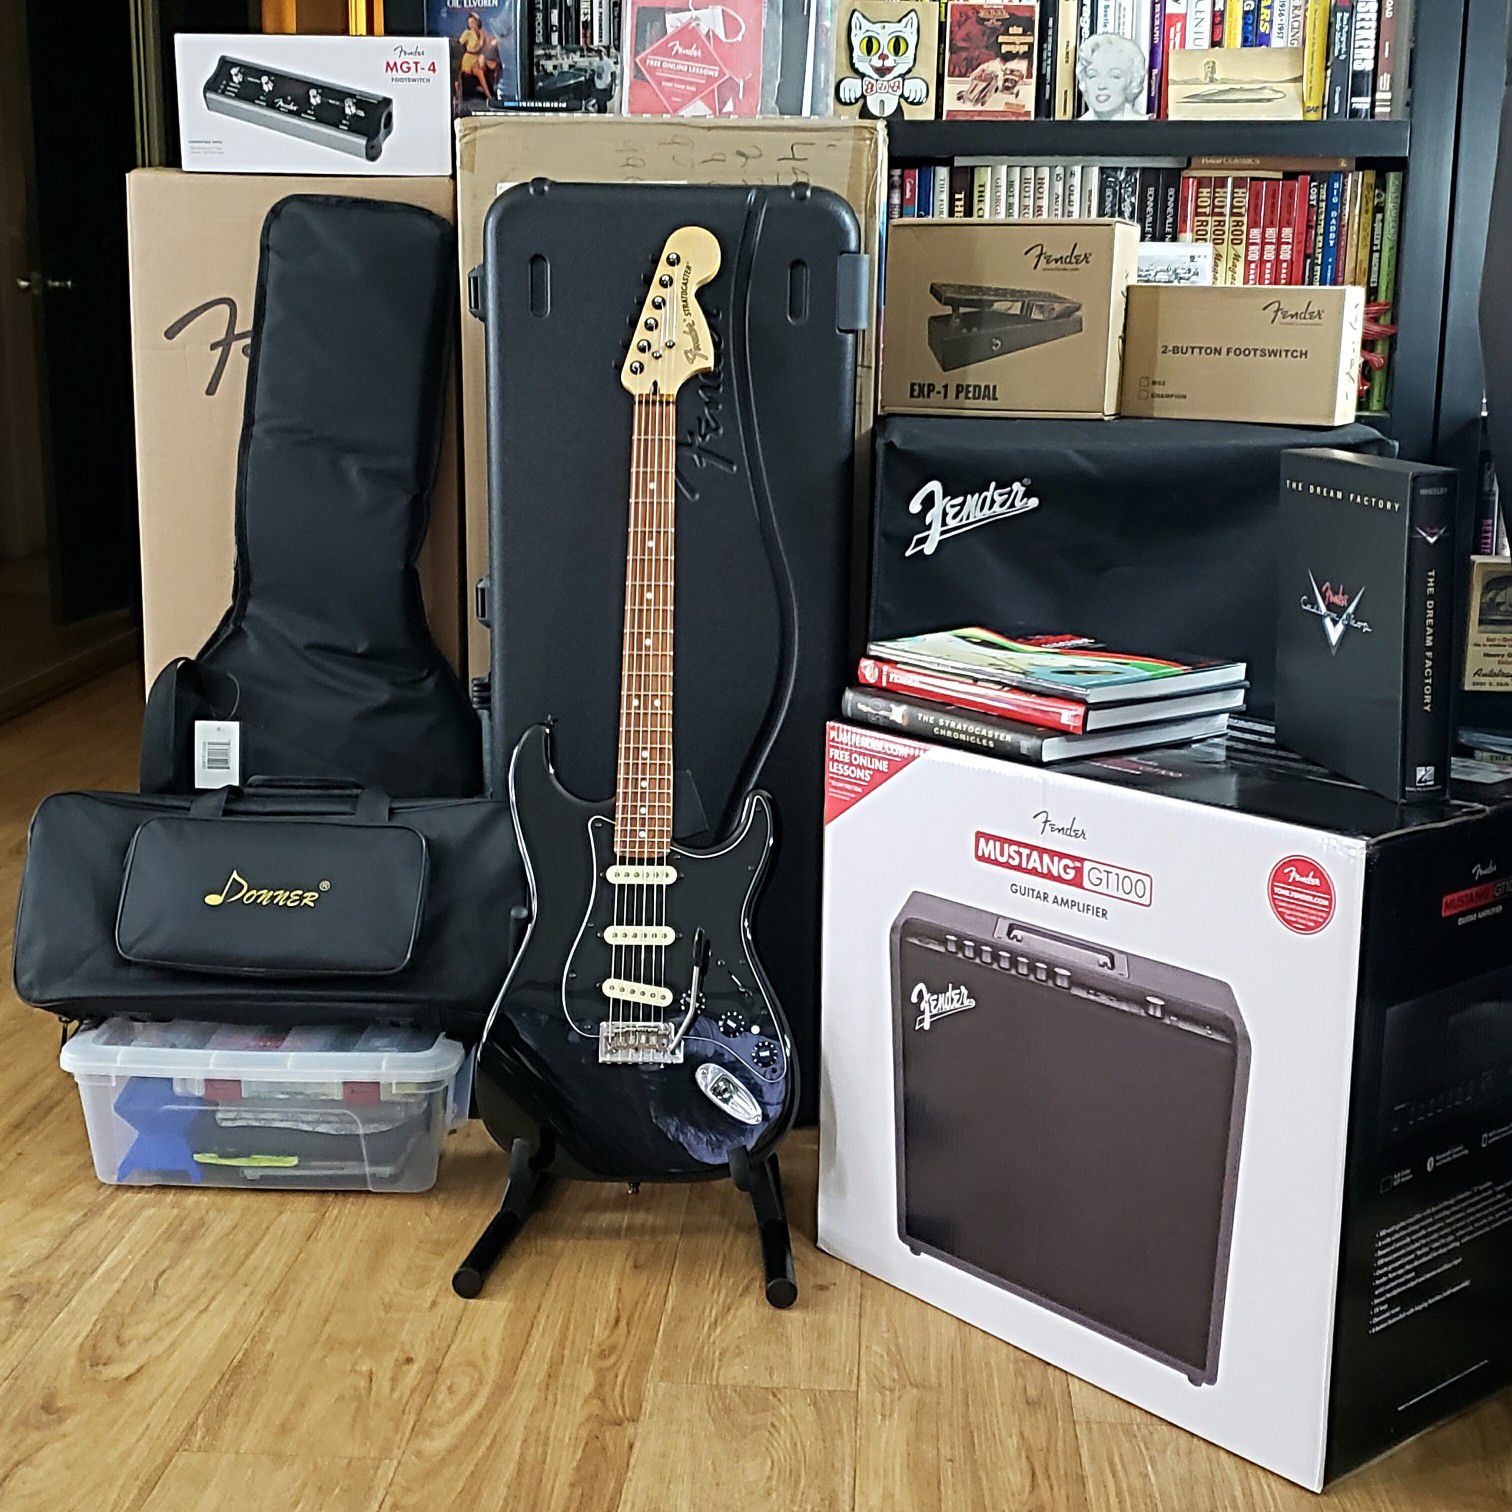 Deluxe Fender Stratocaster, Mustang GT100, Fender Pedals and so much more ALL NEW NEVER USED!